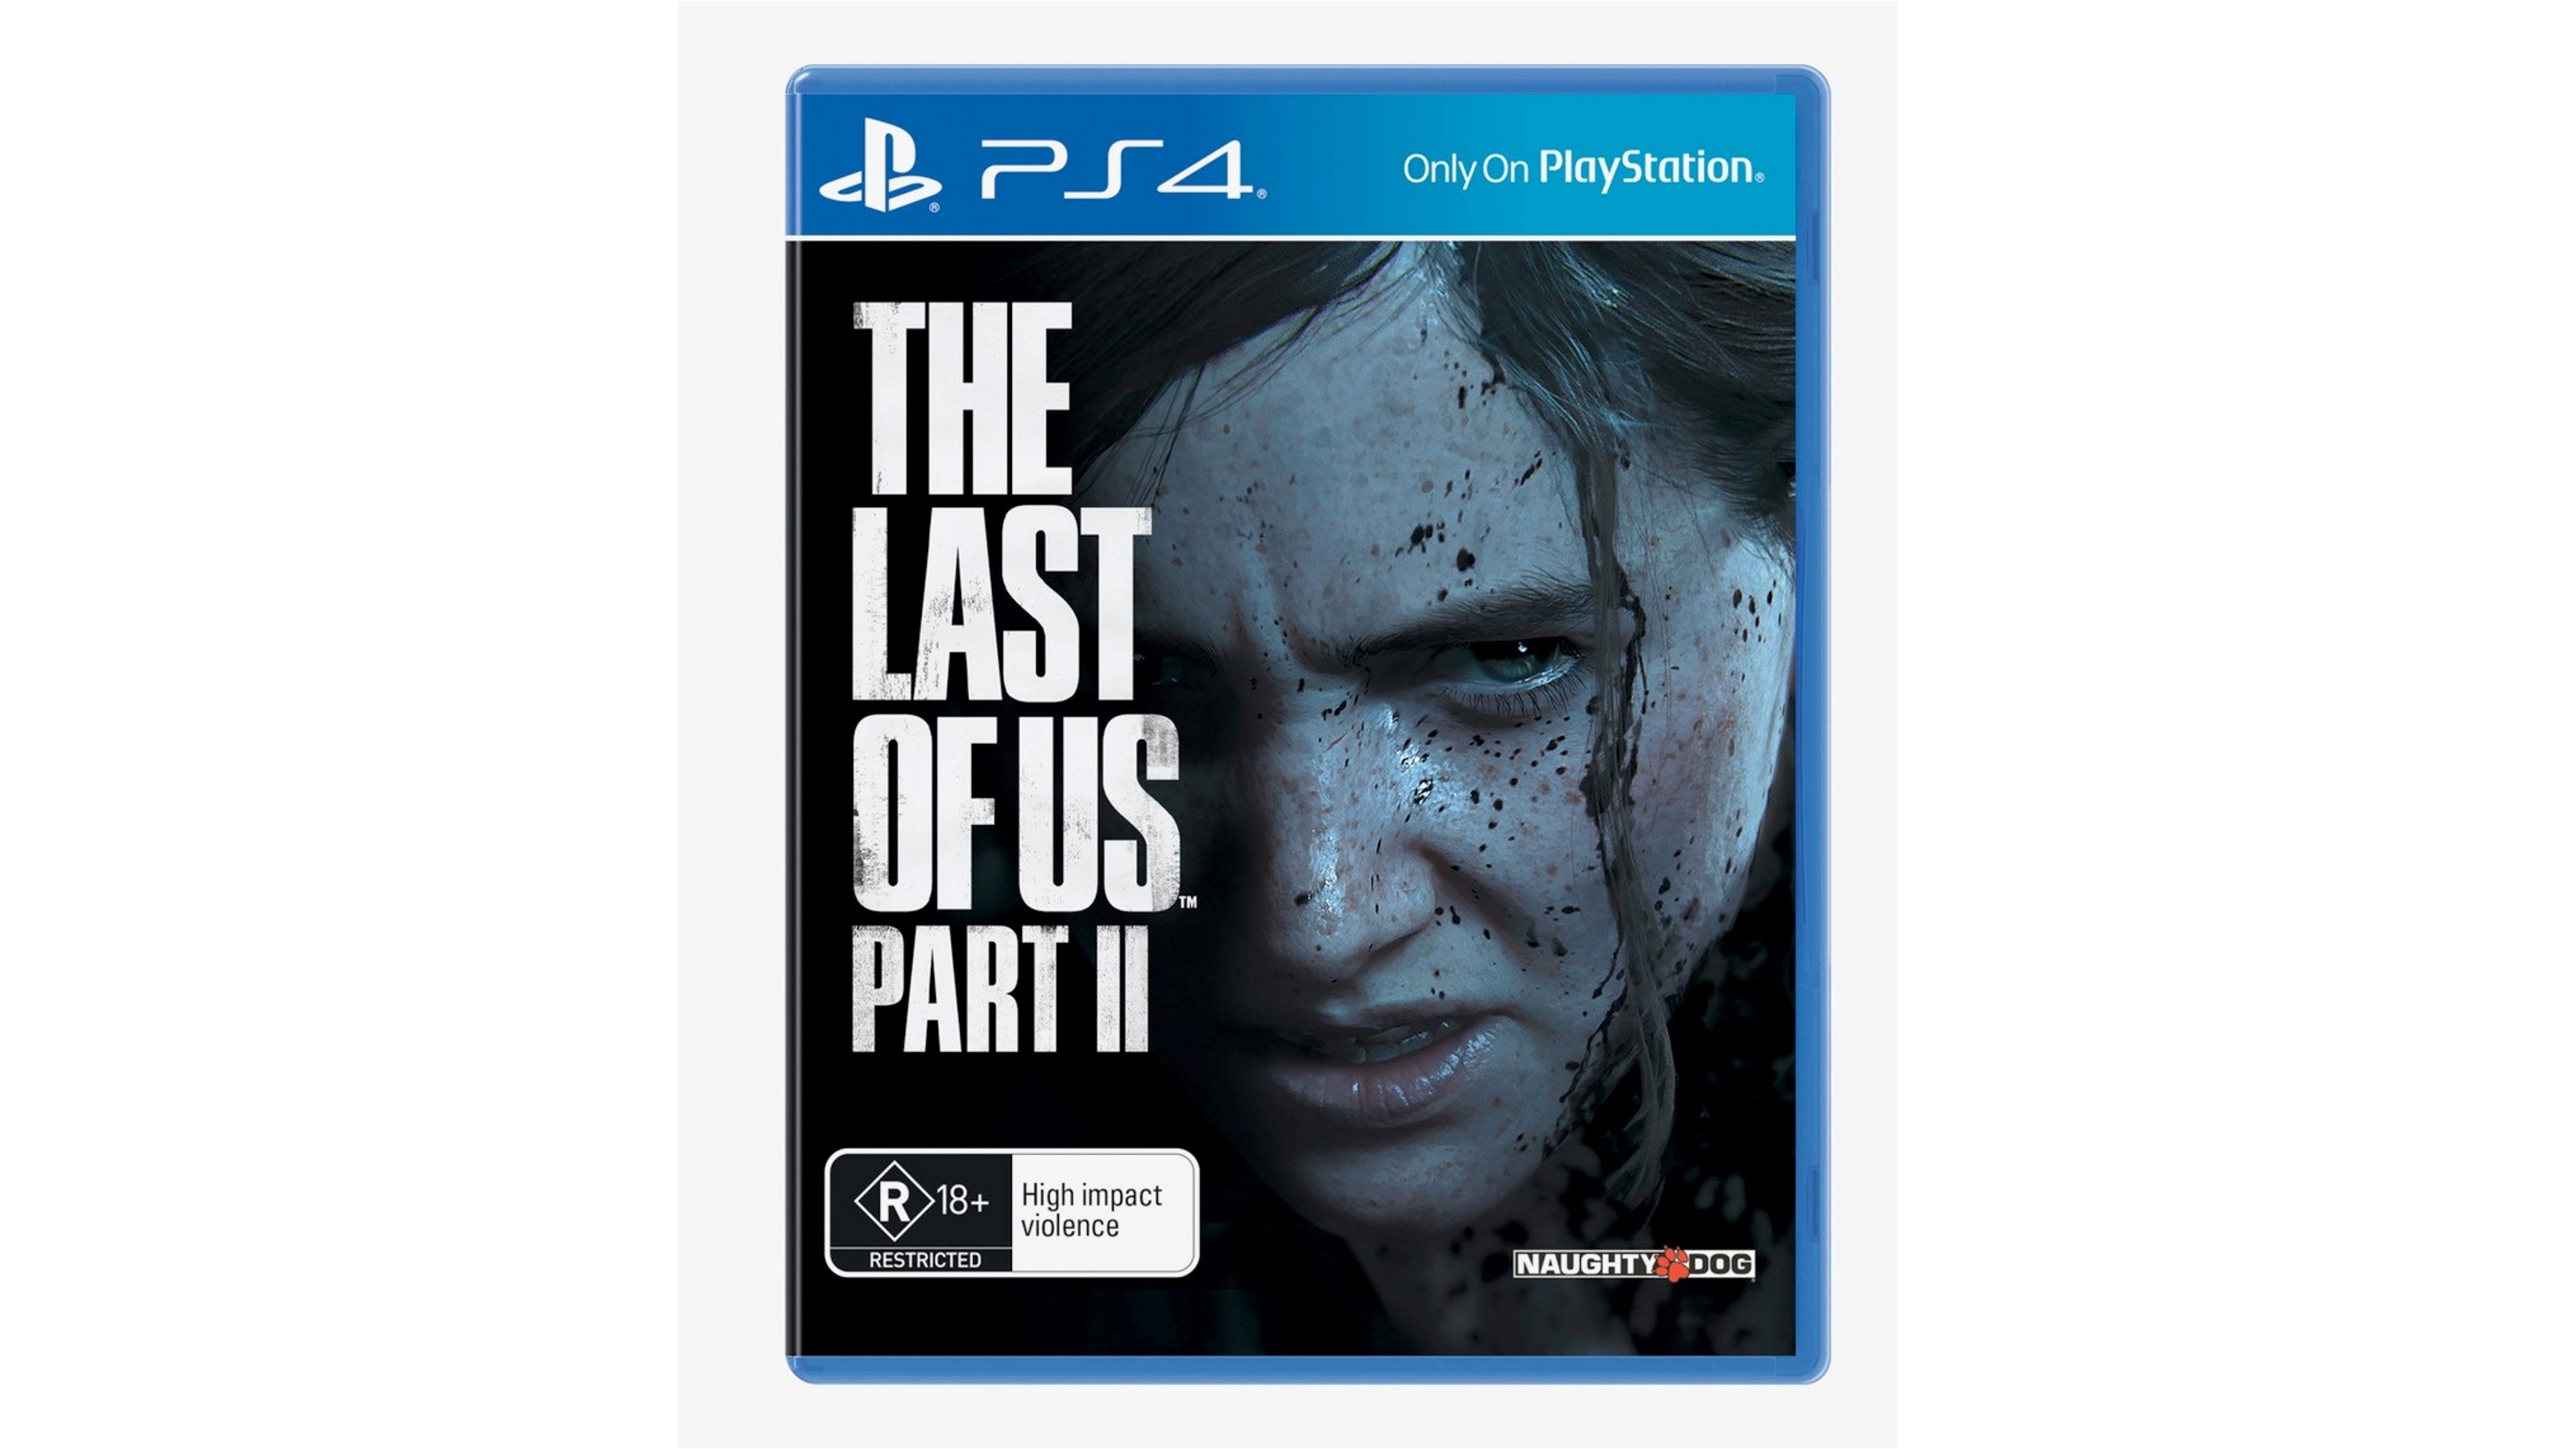 ps4 with the last of us 2